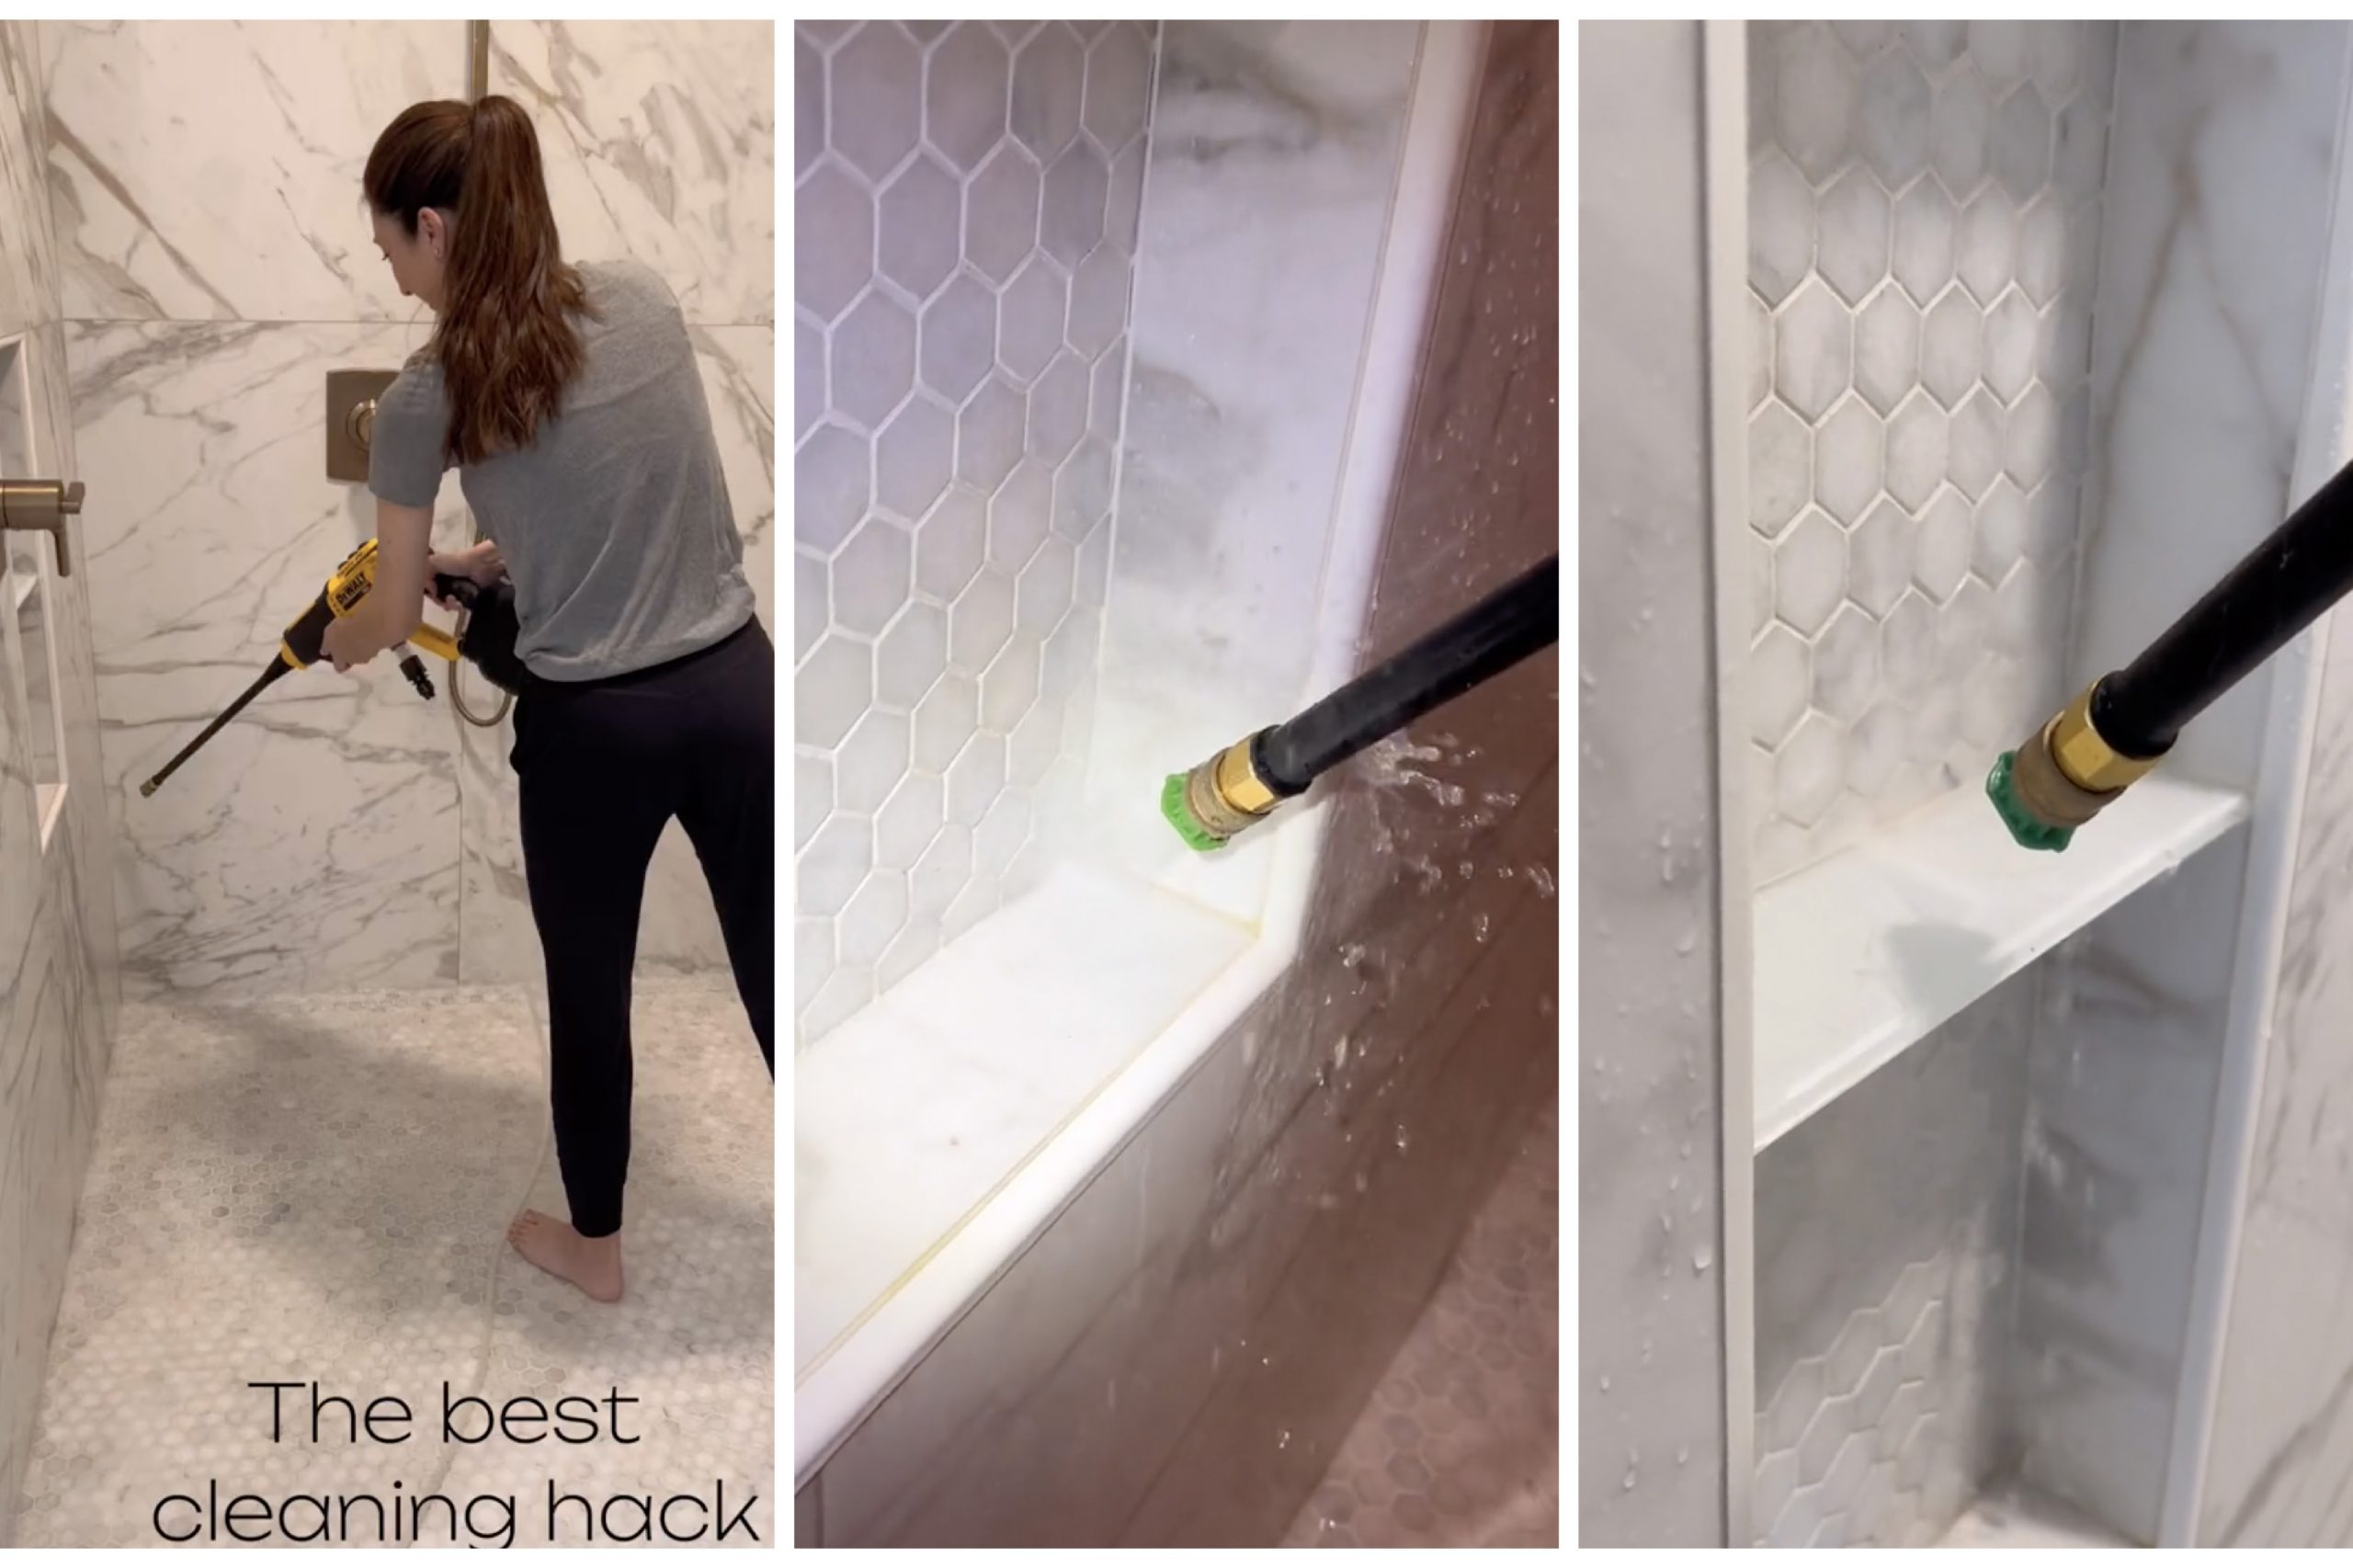 Is the TikTok Hack of Pressure Washing Showers Brilliant or Dangerous?